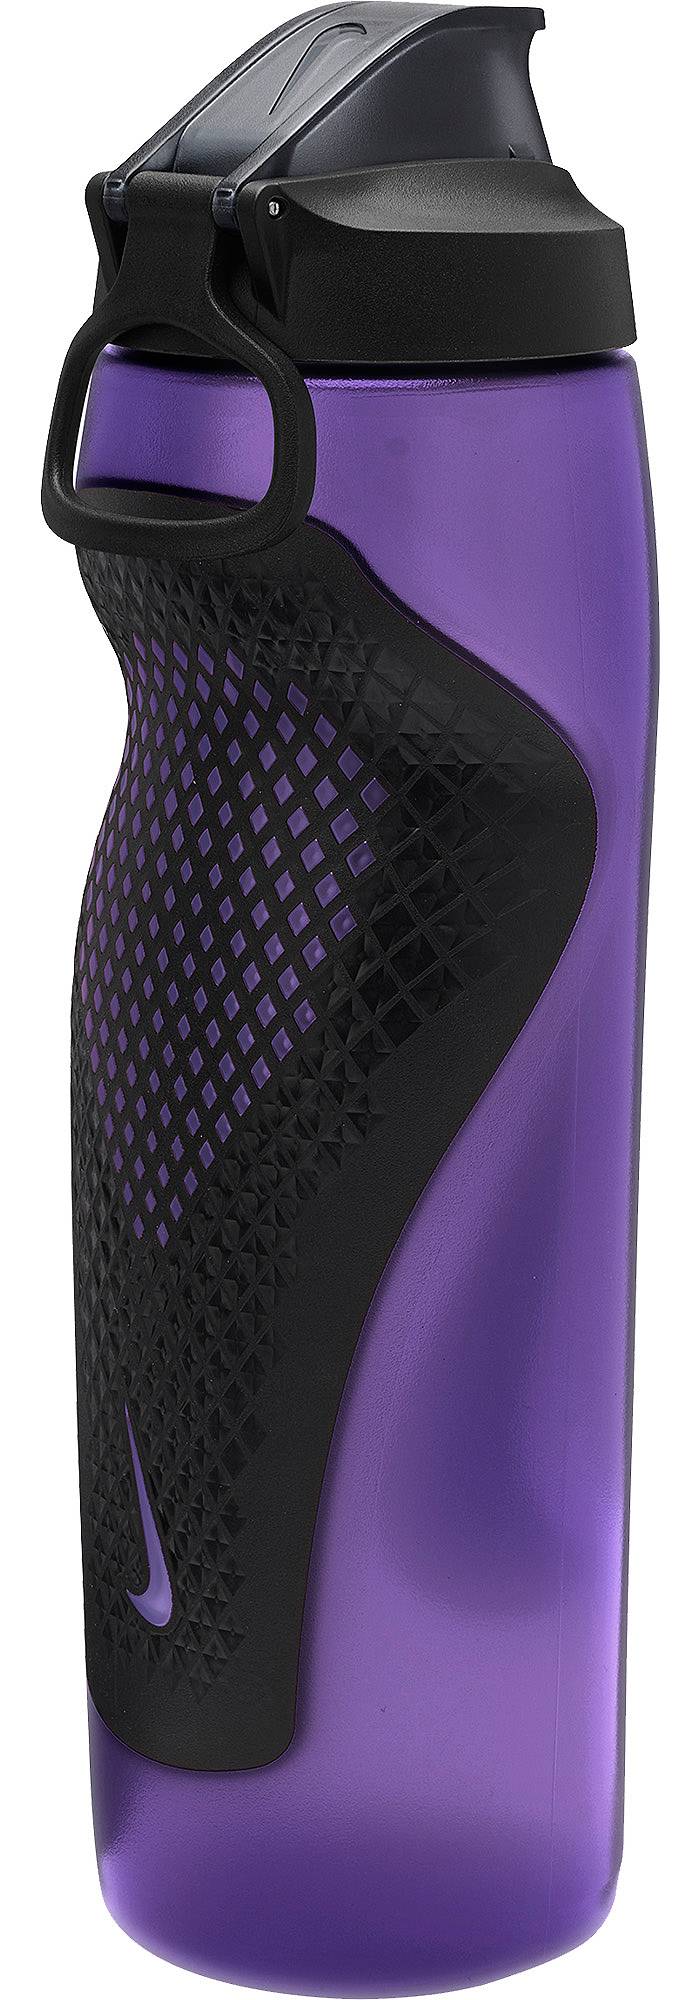 Nike Refuel 32 oz. Water Bottle with Locking Lid, Actiongrape/Blk/Met Gold